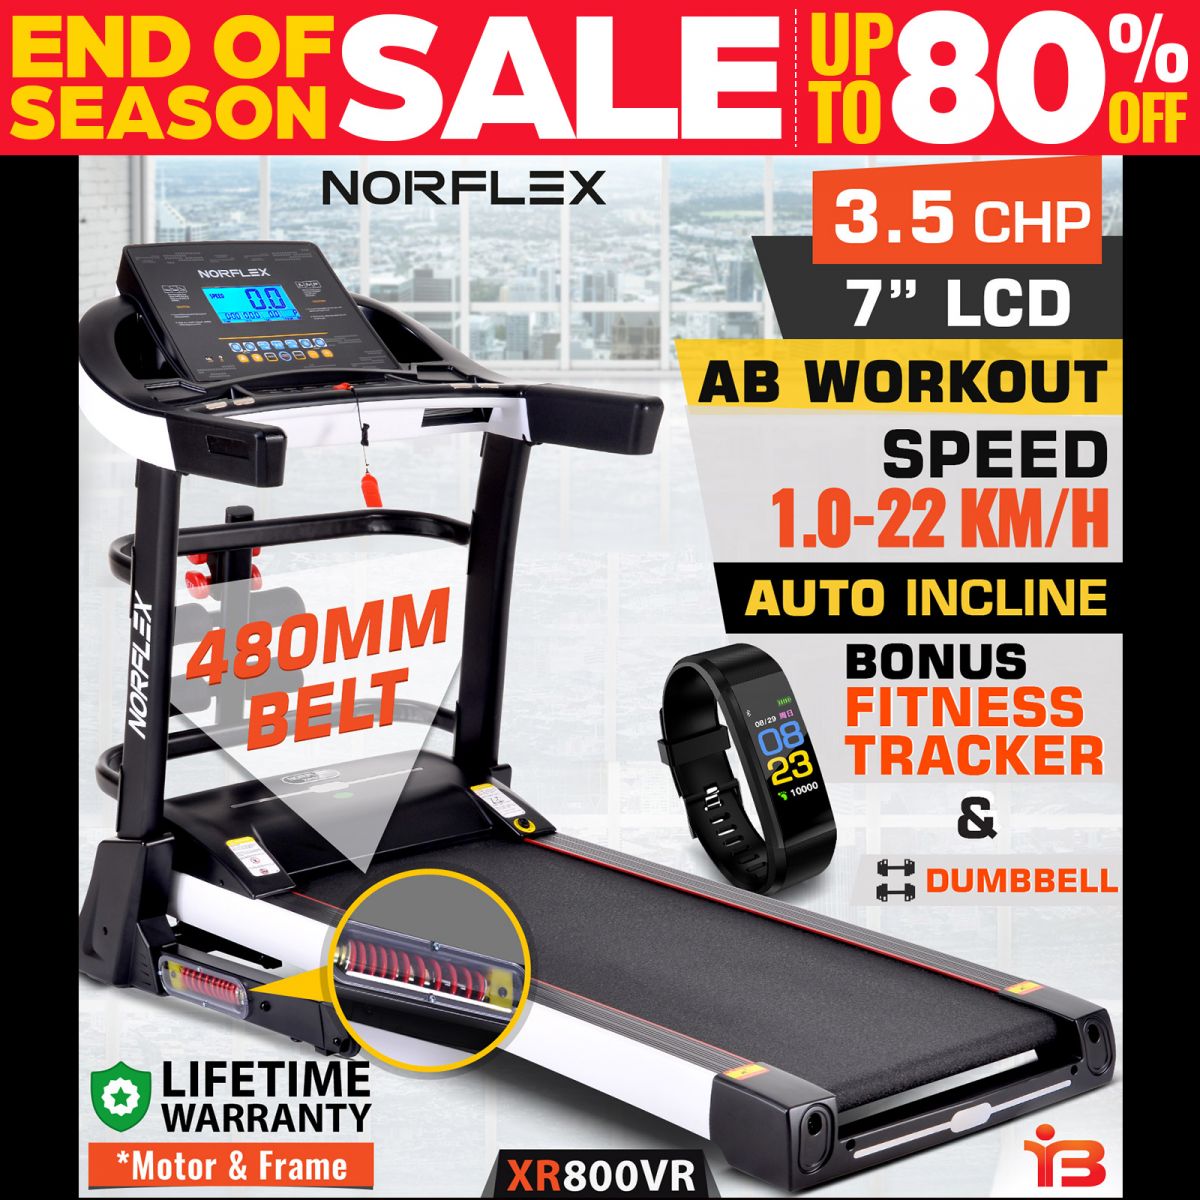 Buy Treadmill Online with Discounts